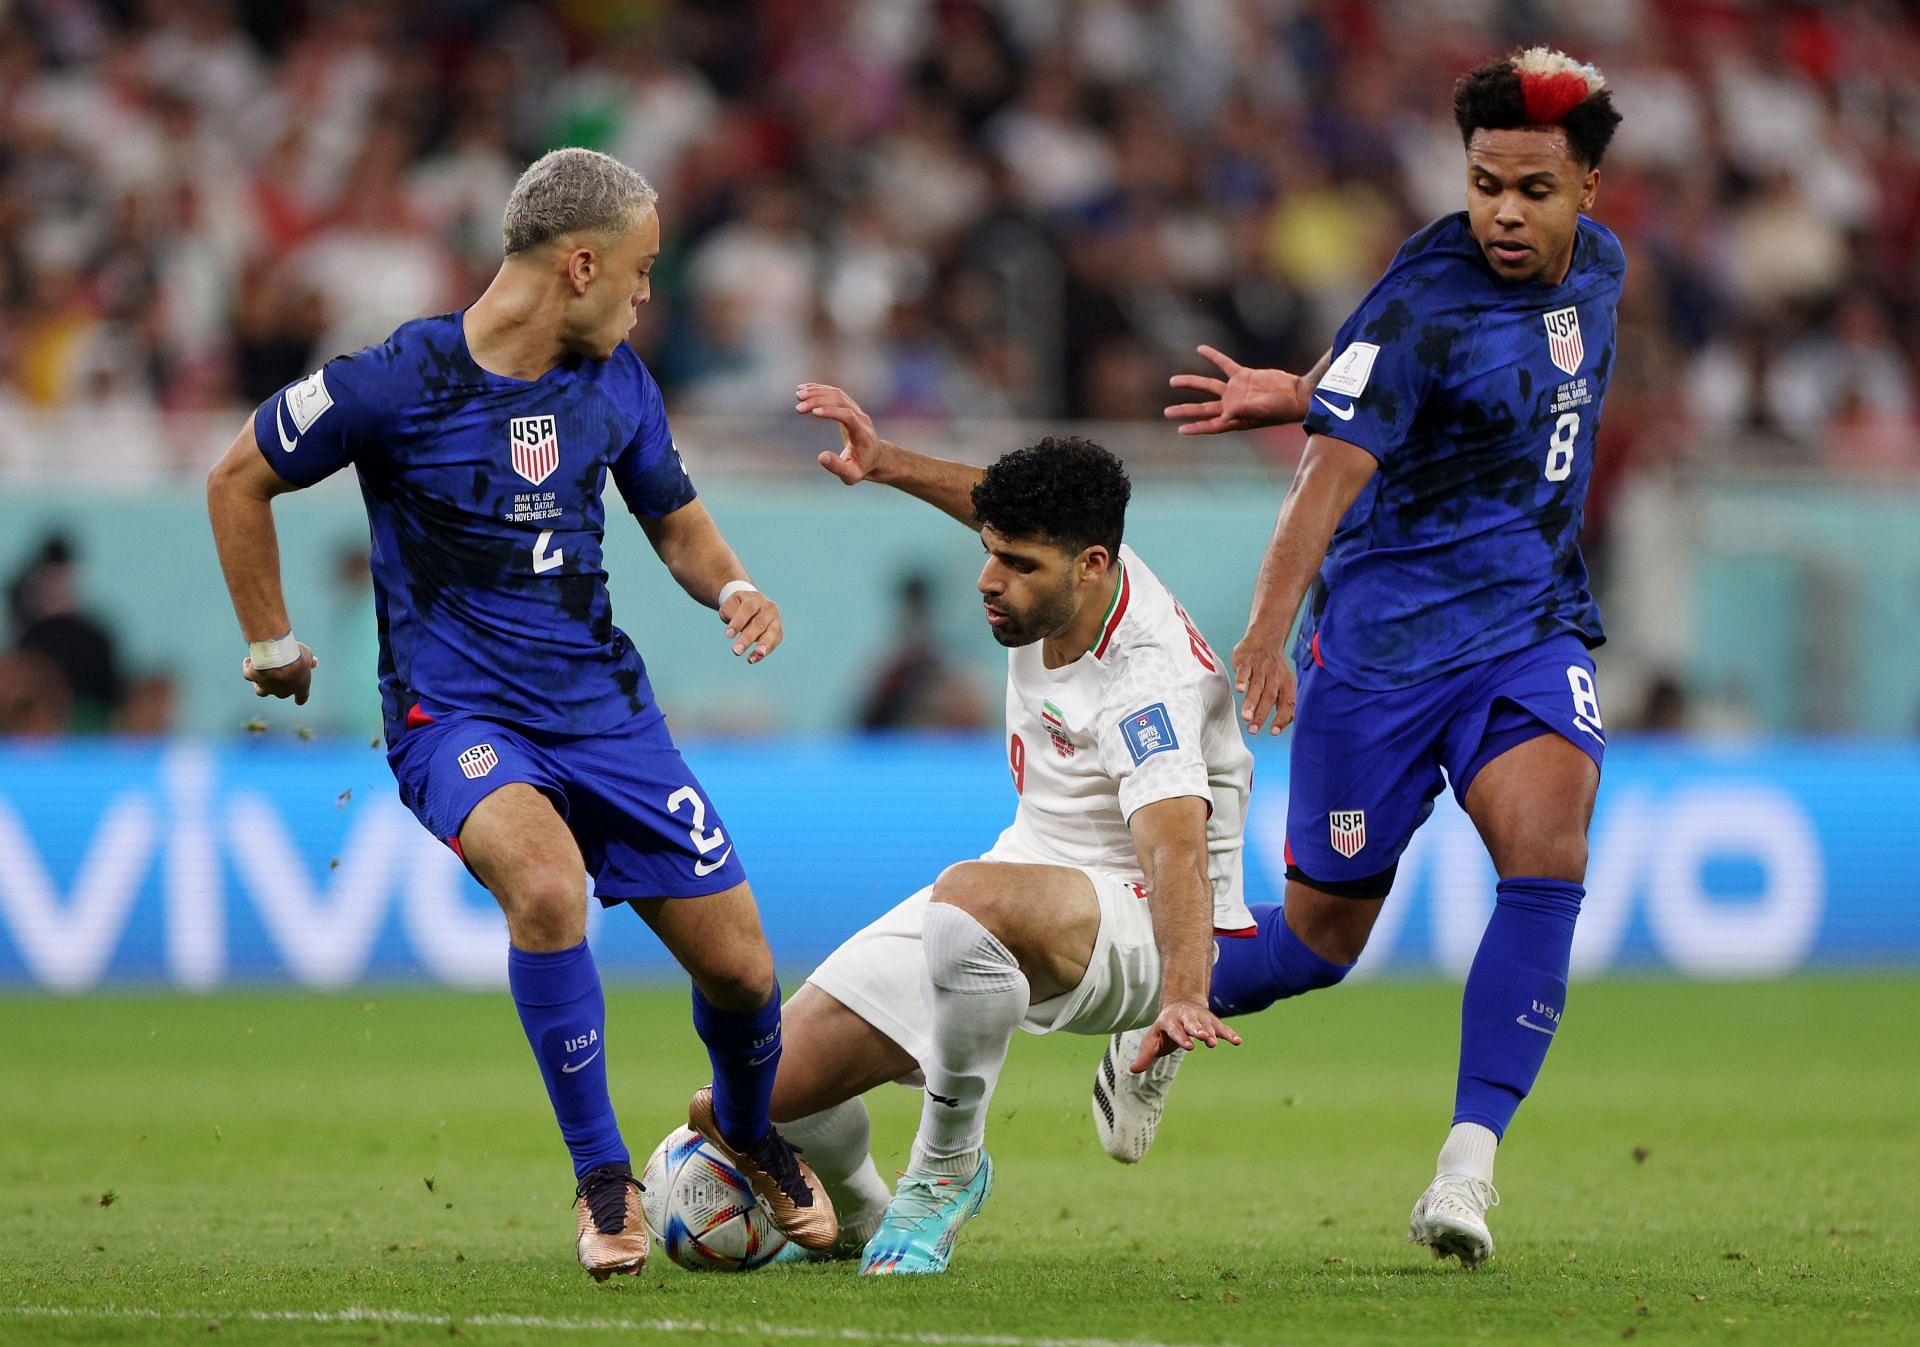 Iran 0-1 USA: Player ratings as Christian Pulisic's goal sets up last-16 clash with the Netherlands | 2022 FIFA World Cup